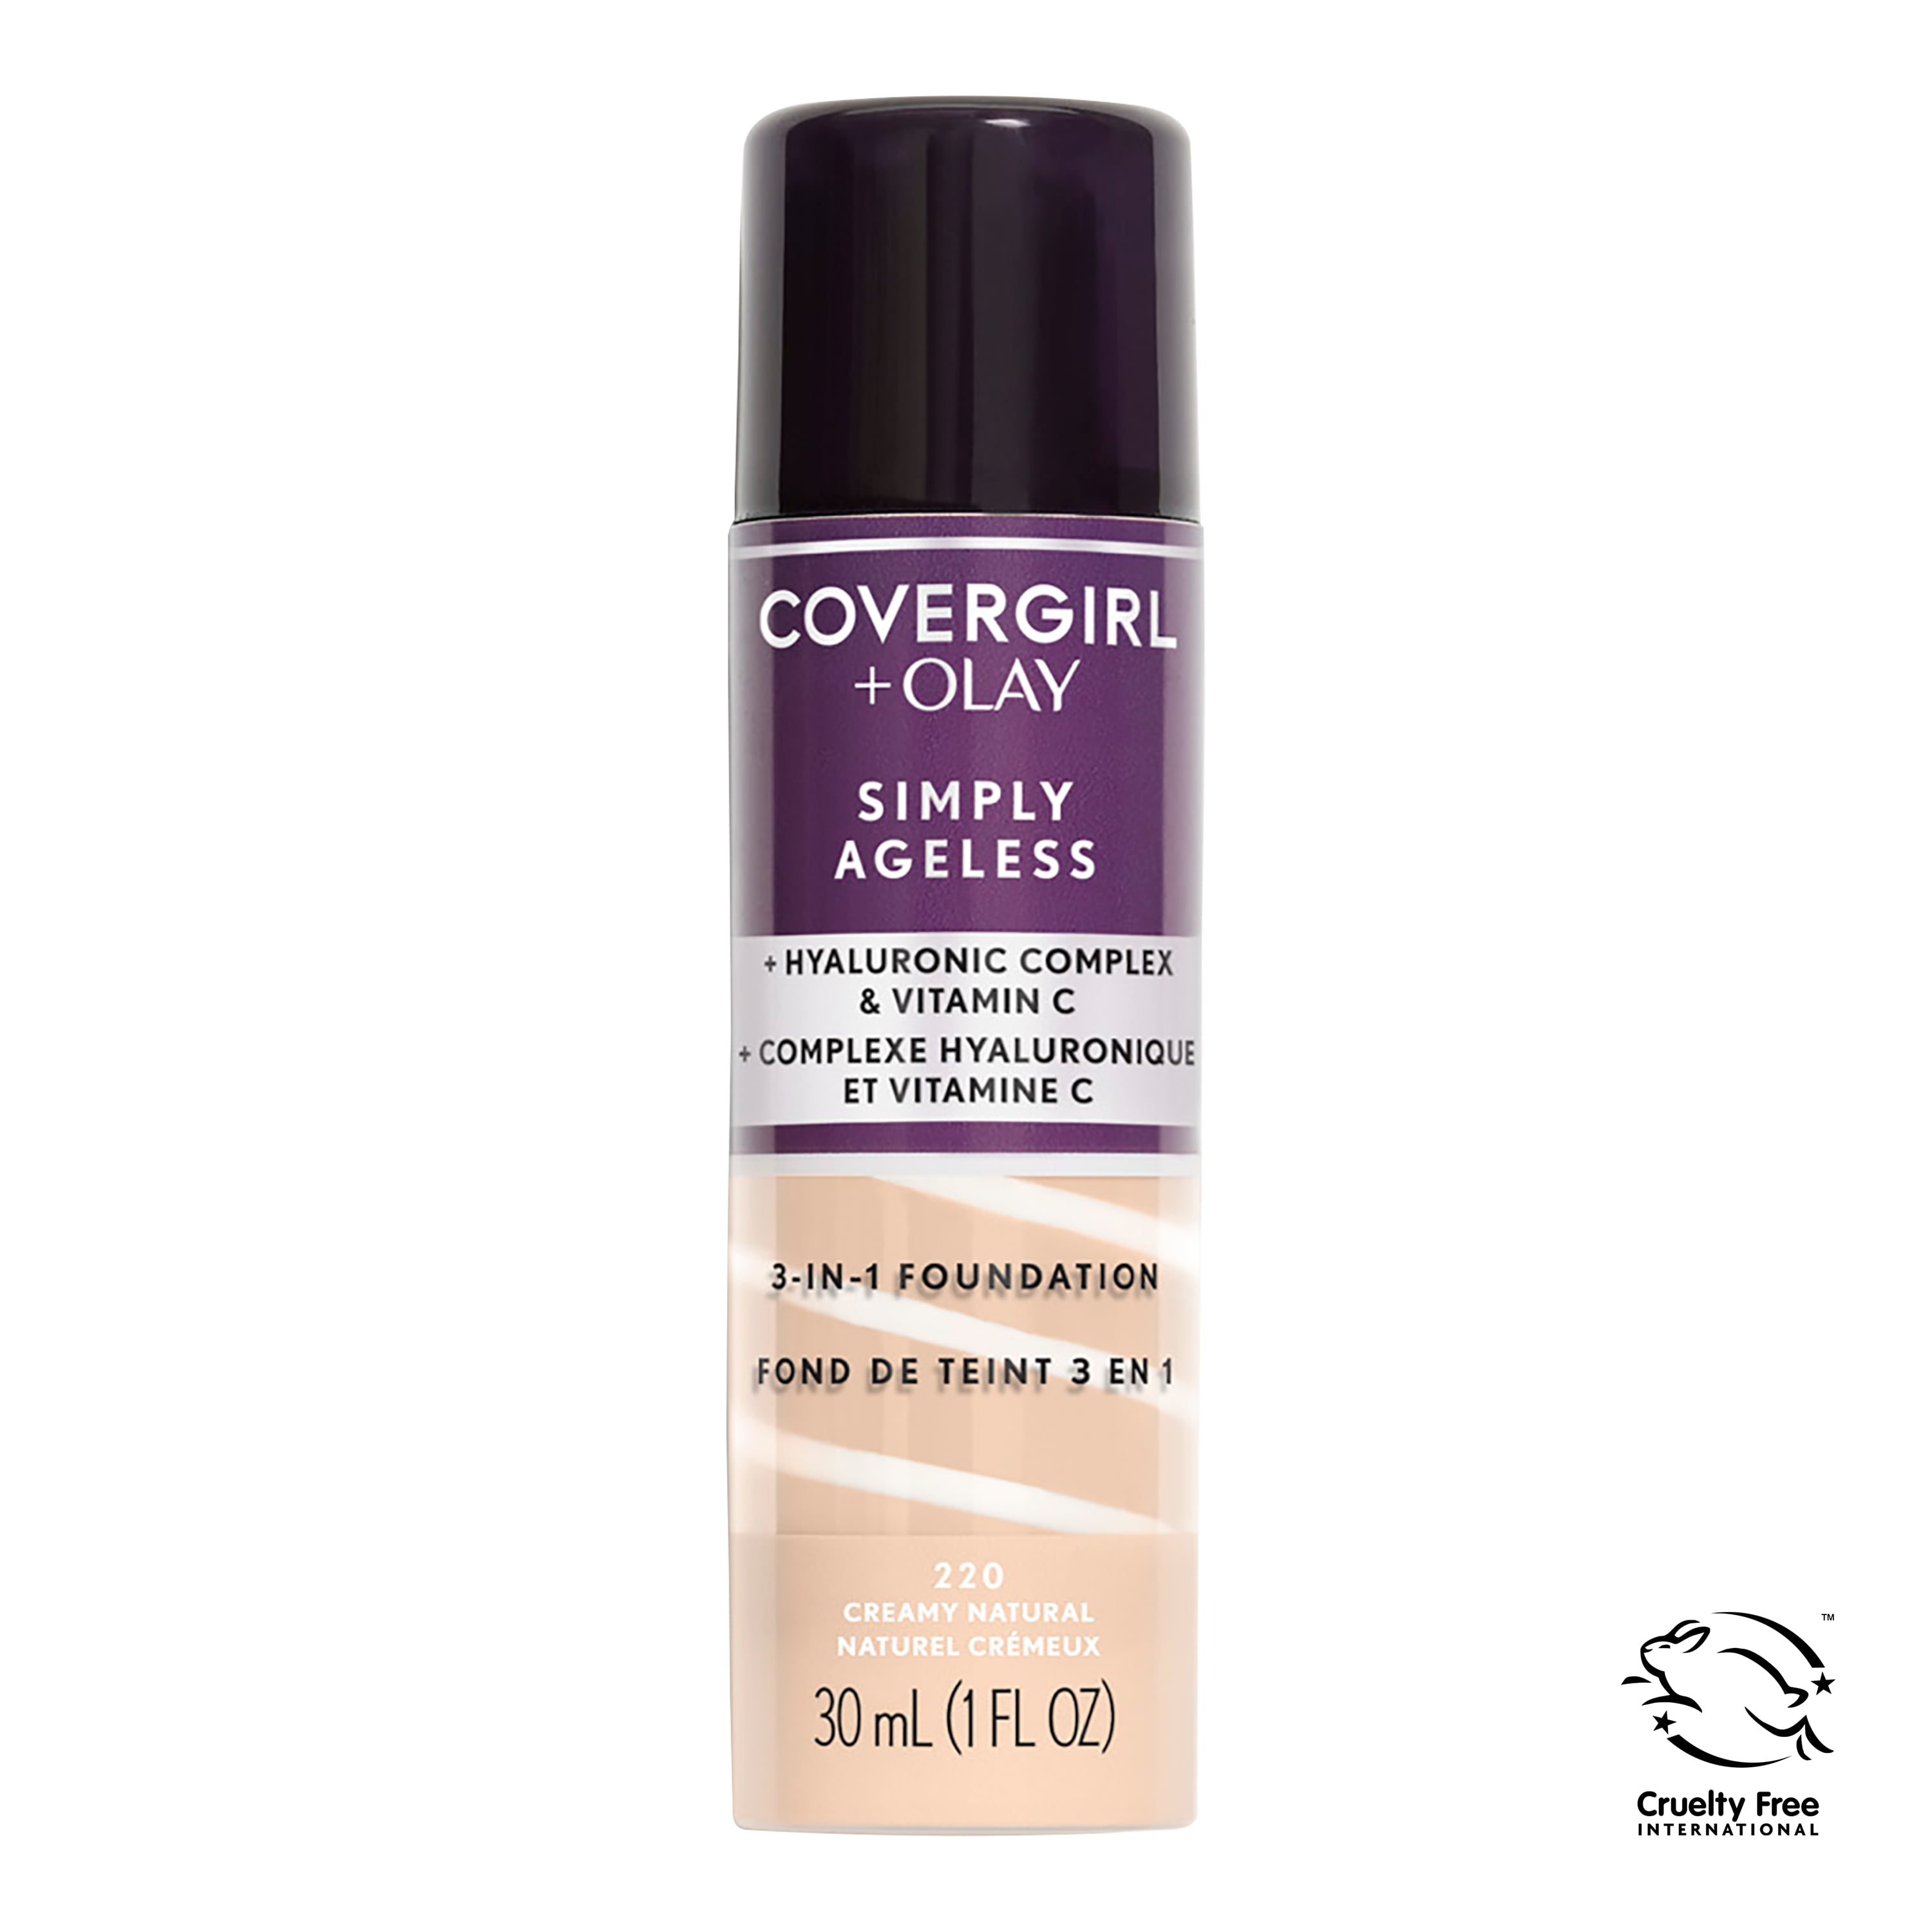 COVERGIRL + OLAY Simply Ageless 3-in-1 Liquid Foundation, 220 Creamy Natural, 1 fl oz, Hydrating Anti-Aging Foundation, Cruelty-Free Foundation, Hyaluronic Complex for Firm Skin